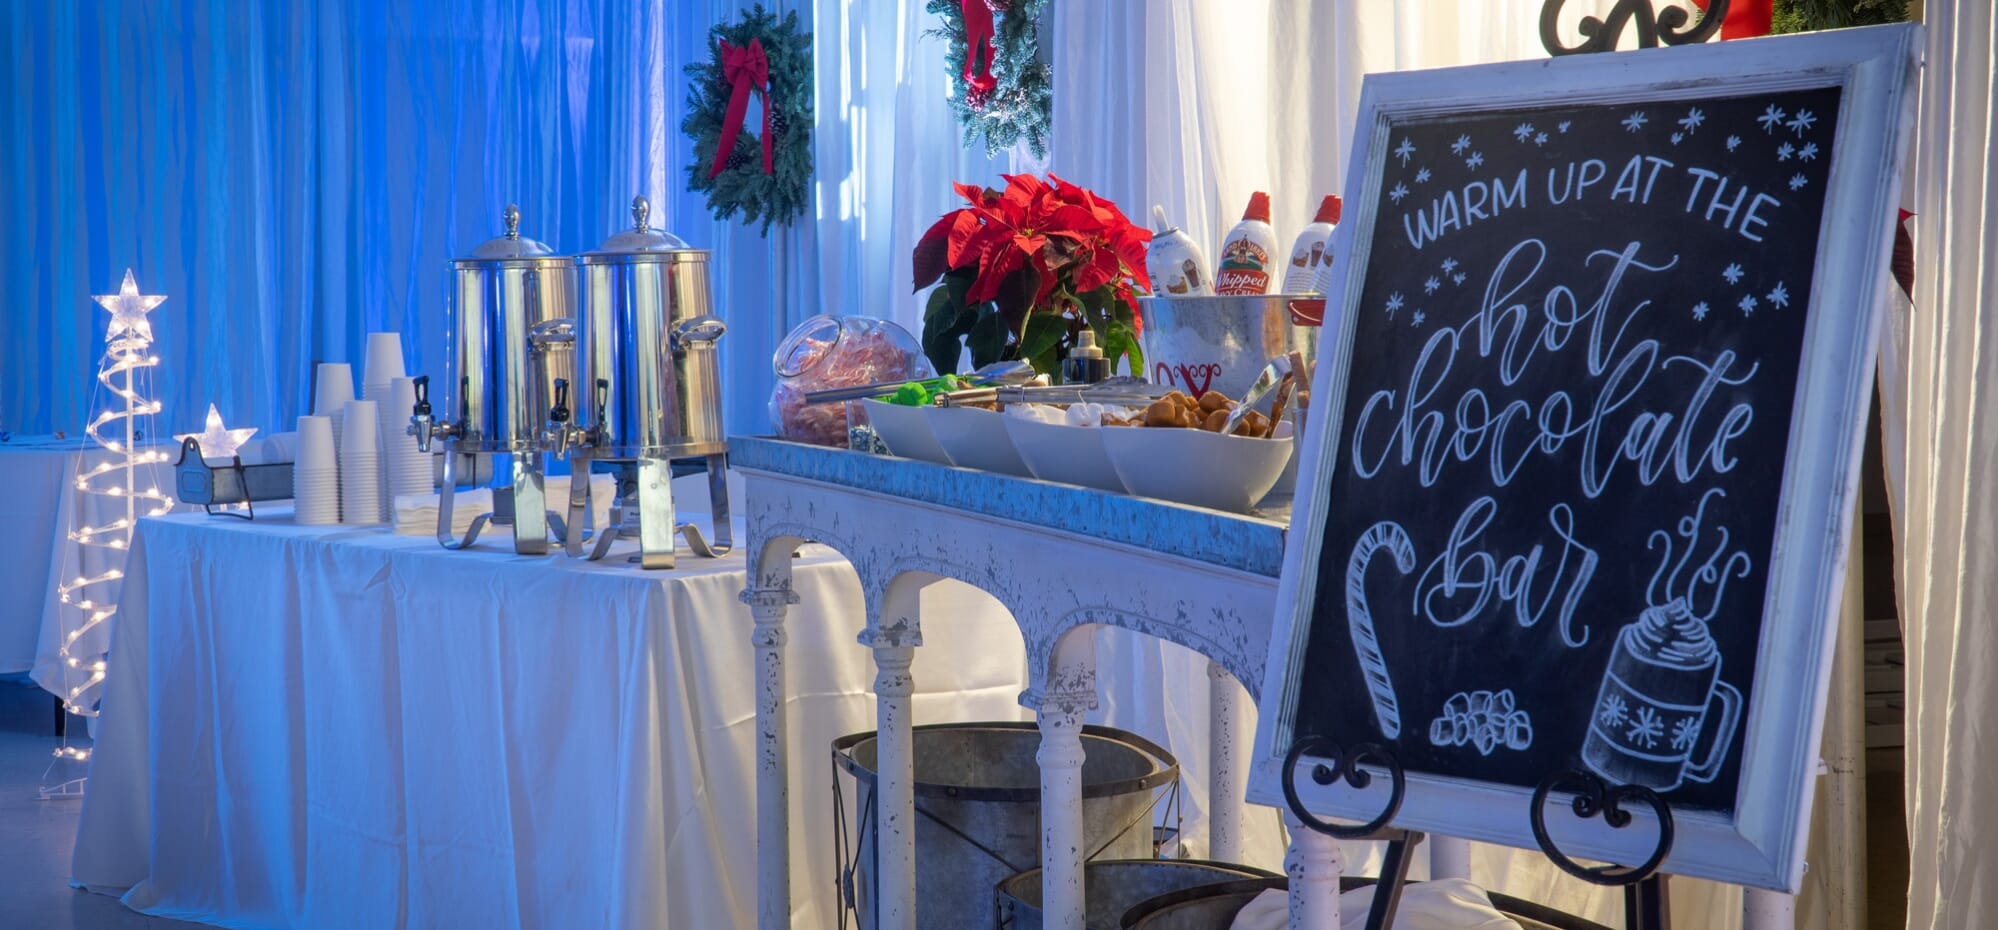 Host a morning Christmas party